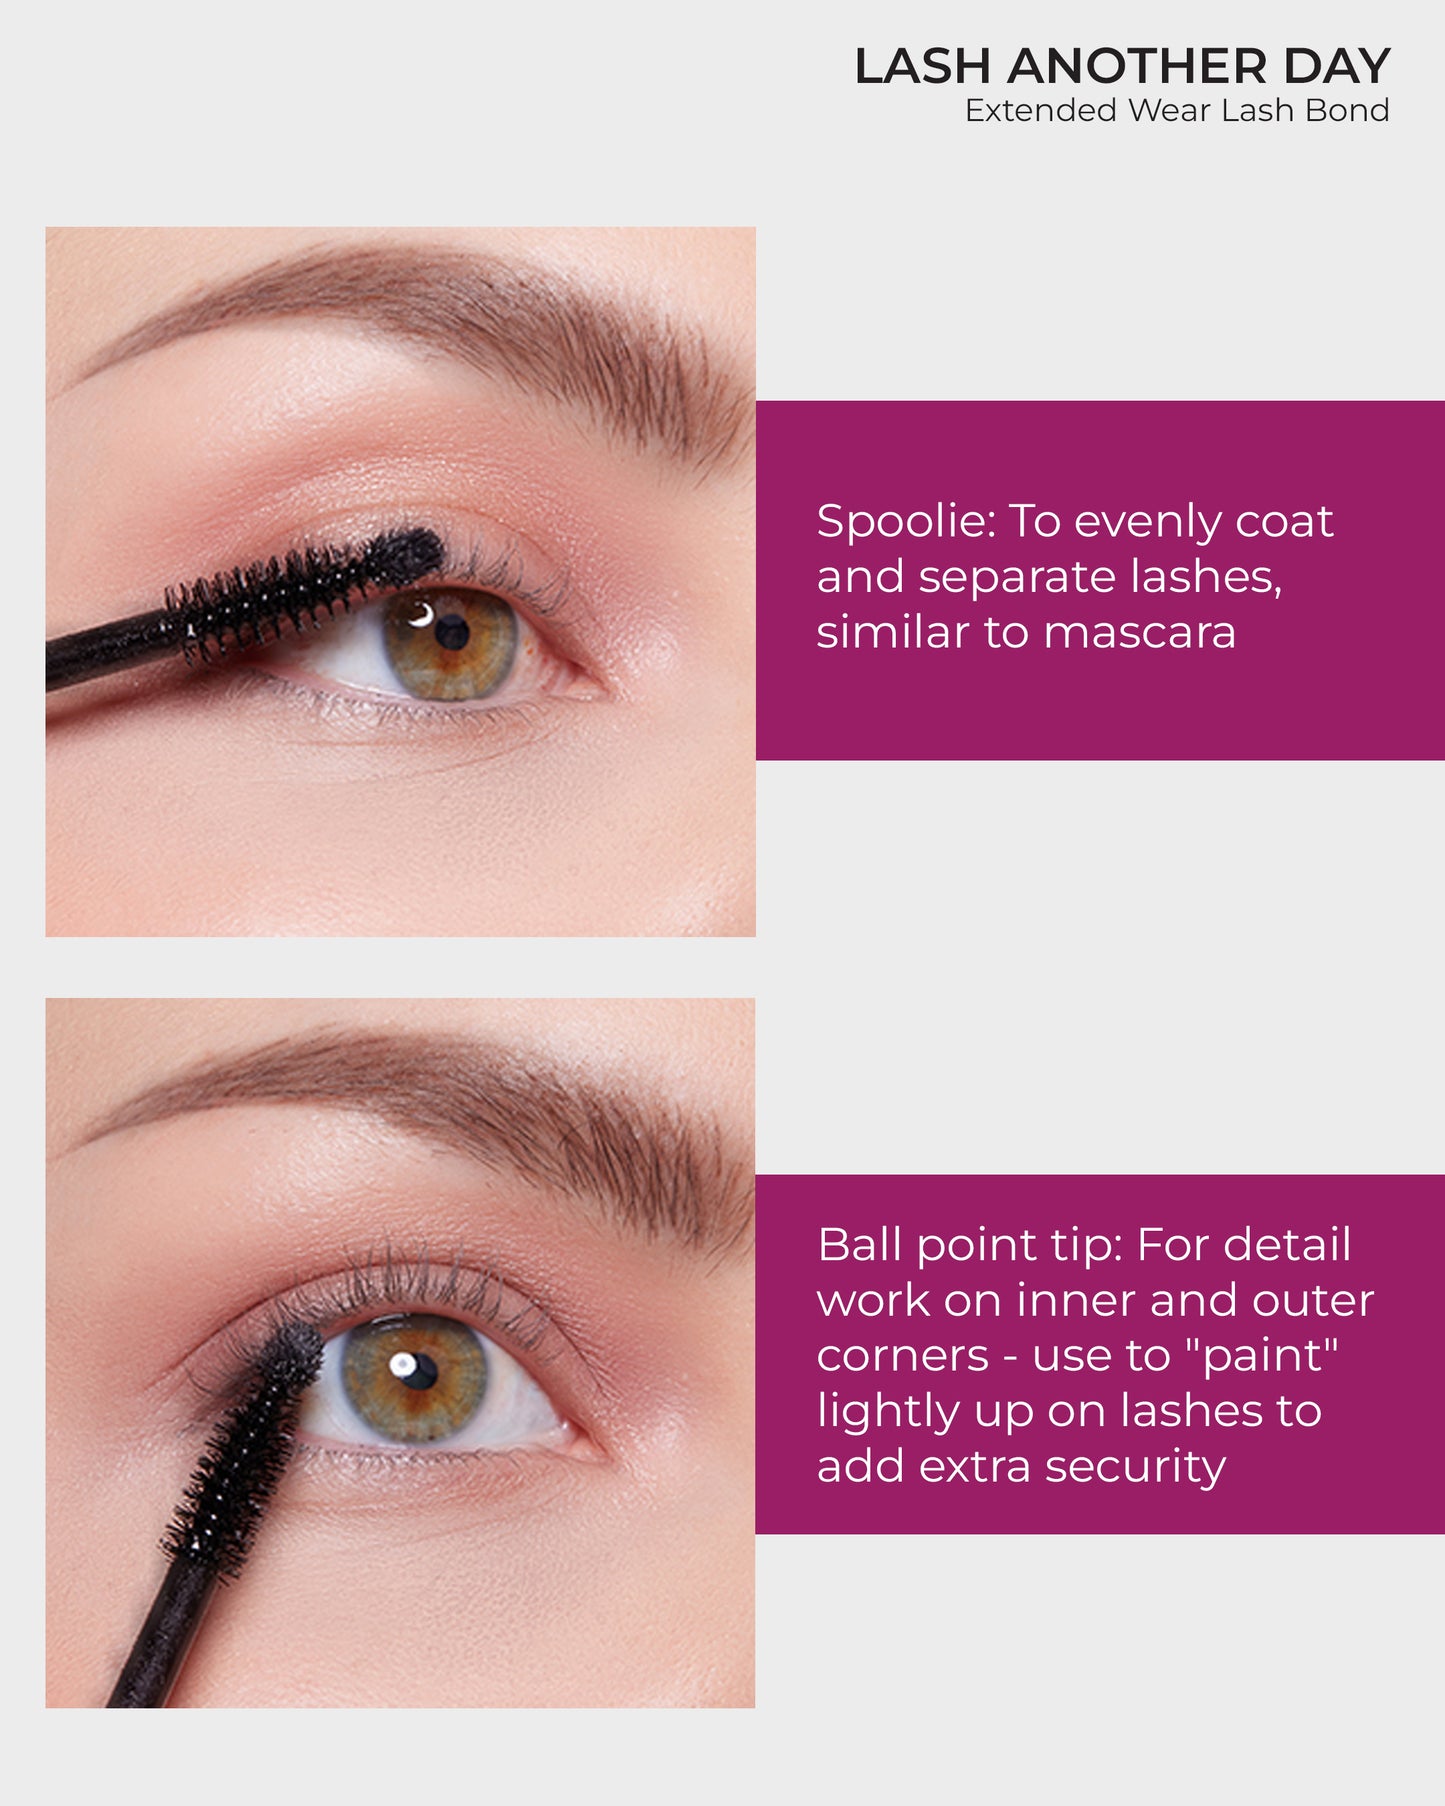 Lilly Lashes | 3D Undercover | Lash Another Day | Lash Bond Infographic